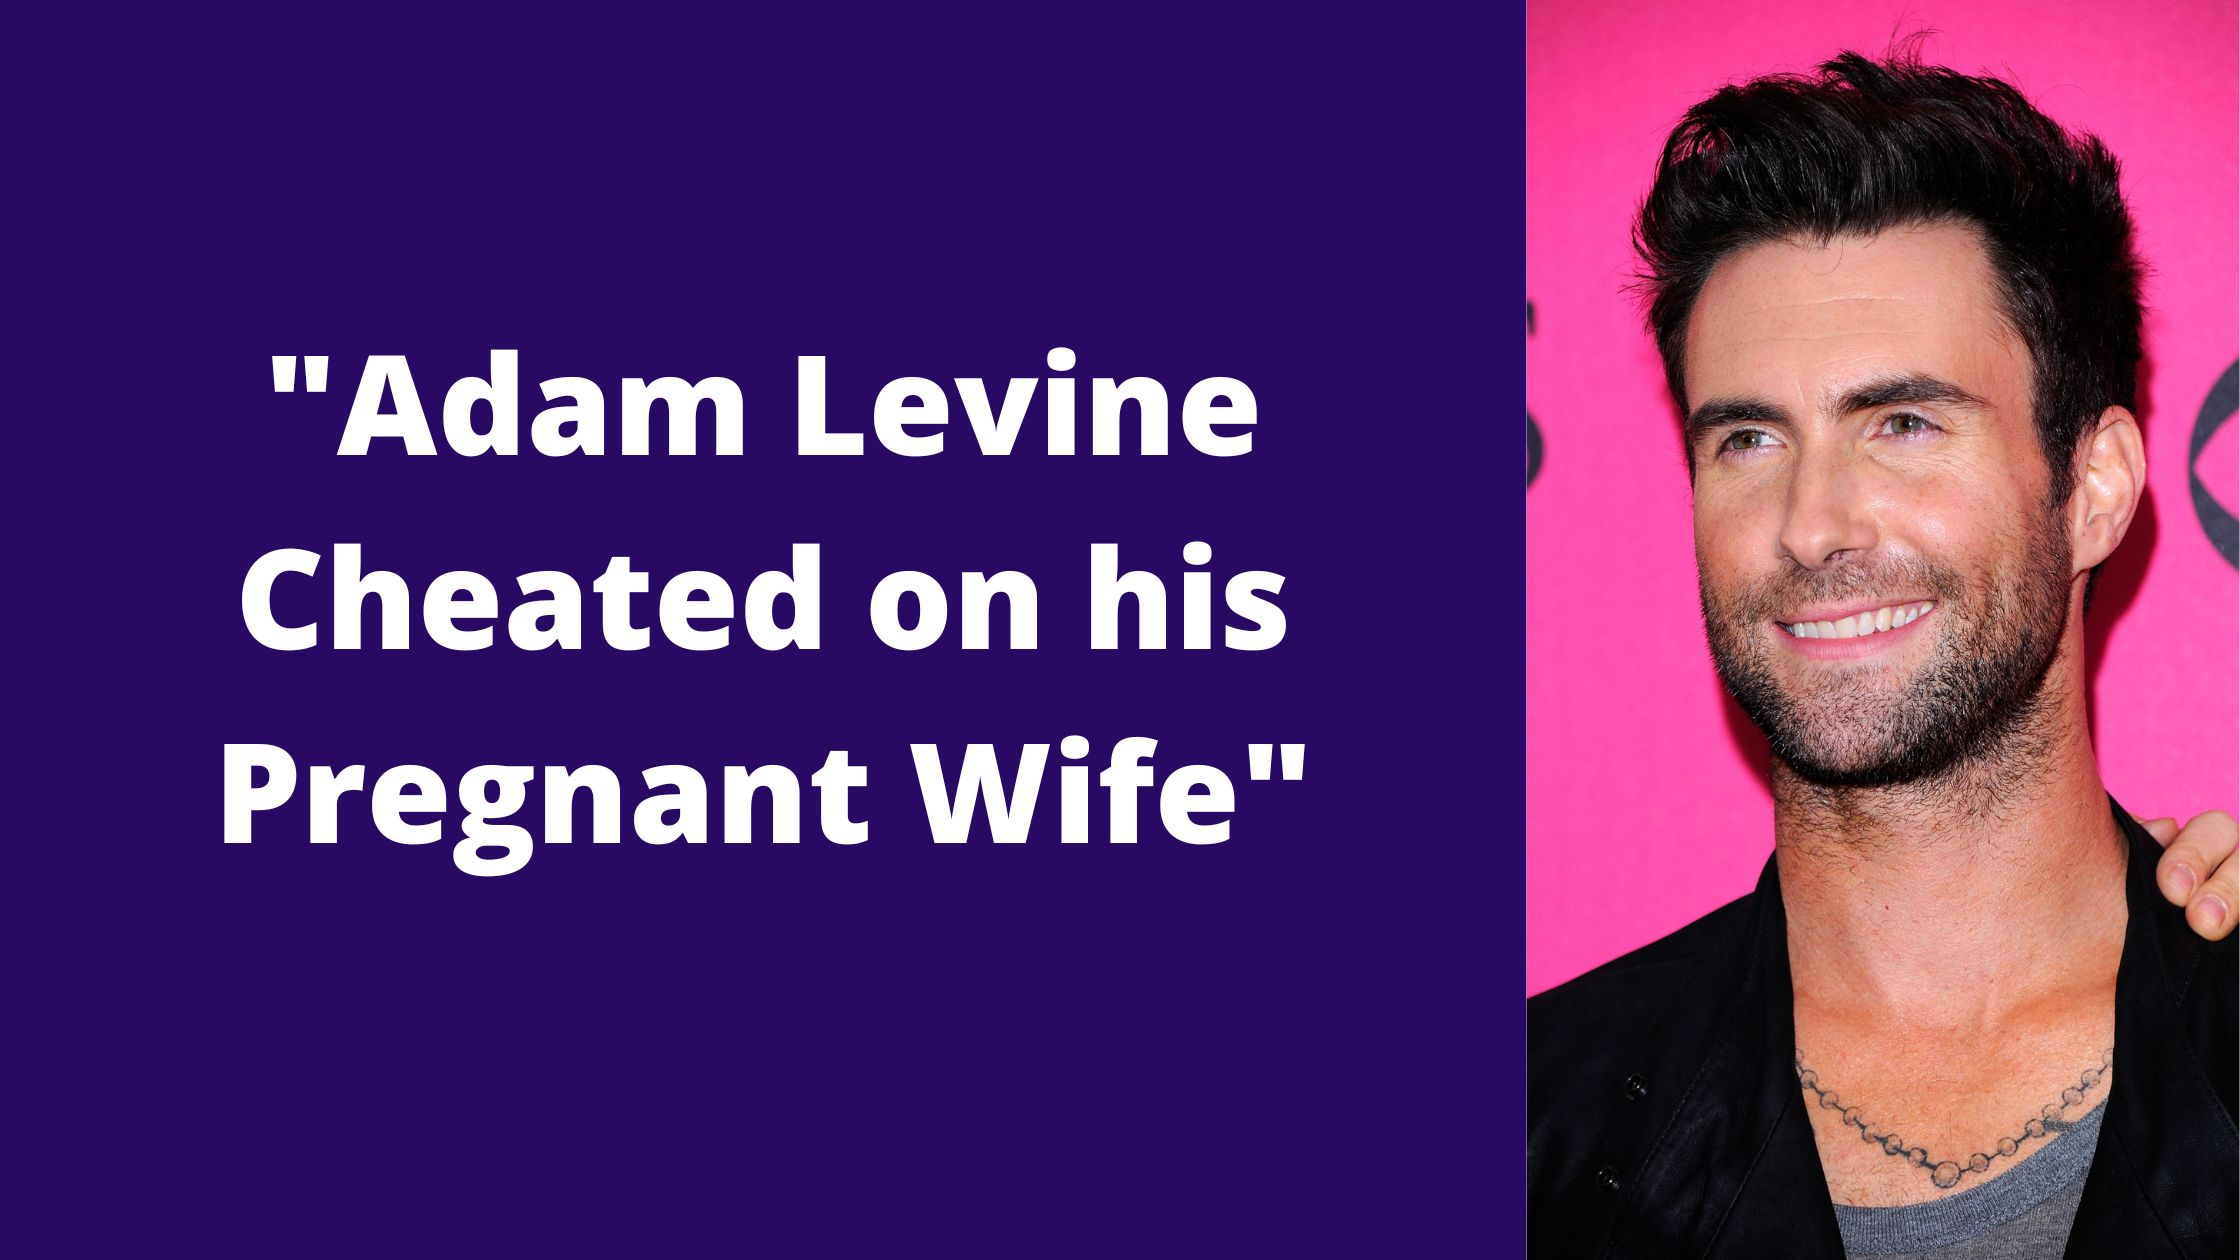 Adam Levine Cheated on his Pregnant Wife